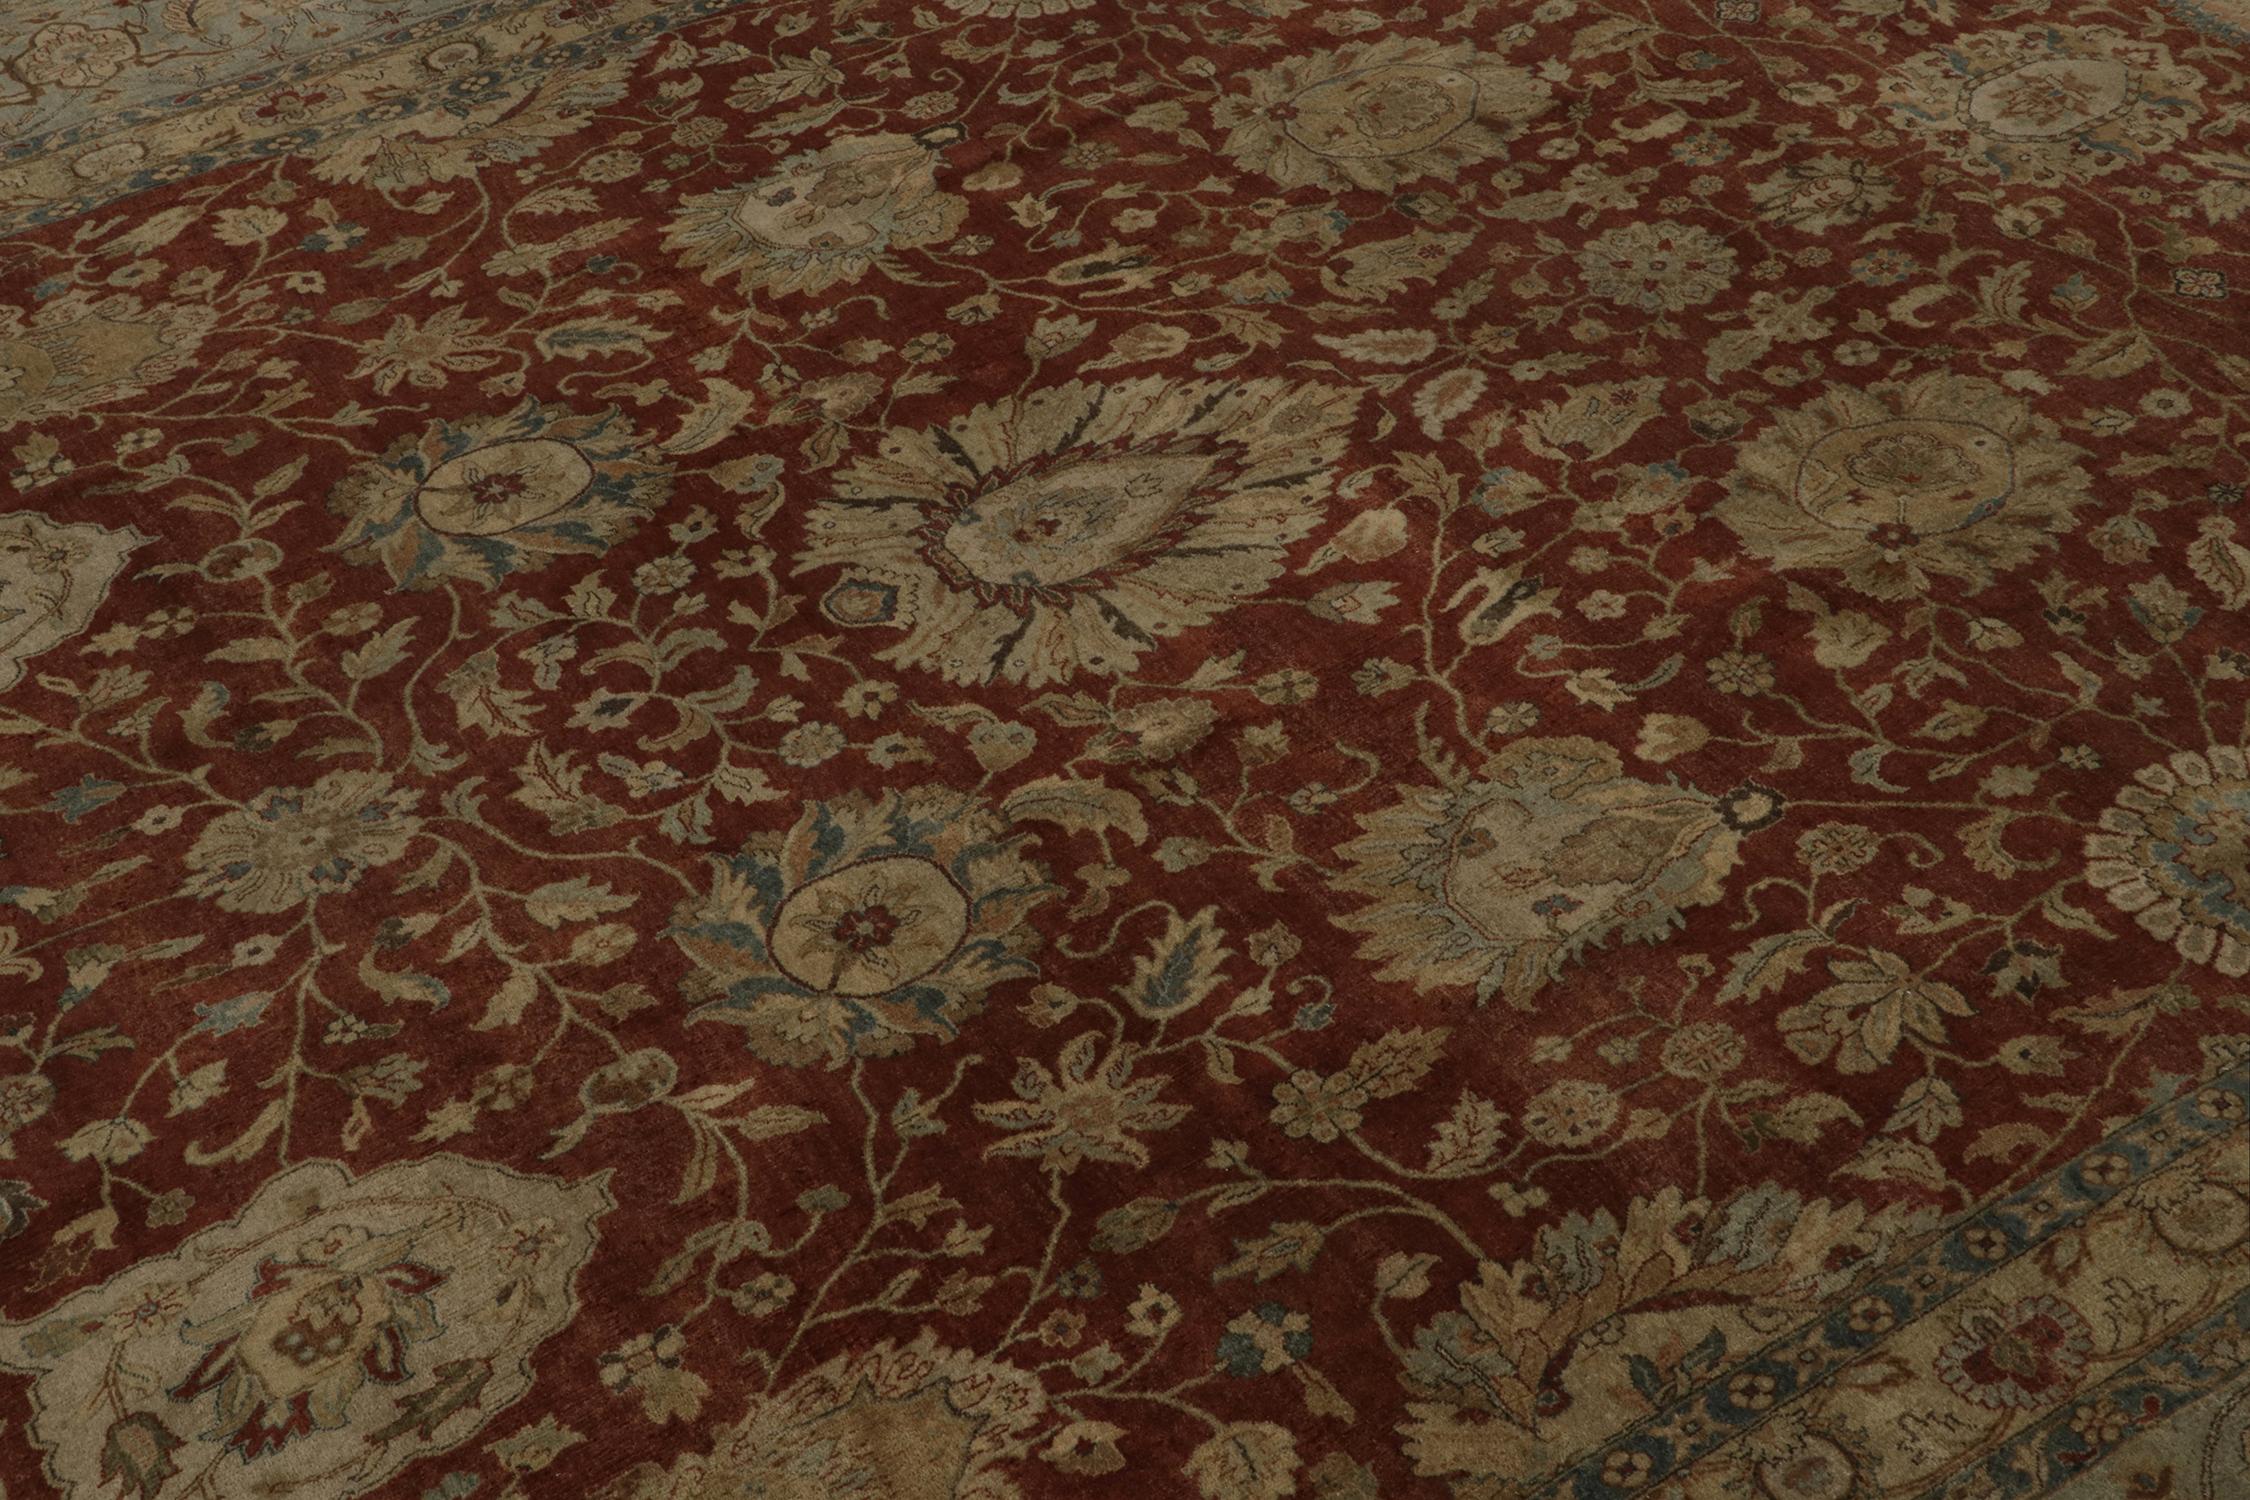 Hand-Knotted Rug & Kilim’s Classic Tabriz style rug with Beige & Blue Florals on Rust Red For Sale